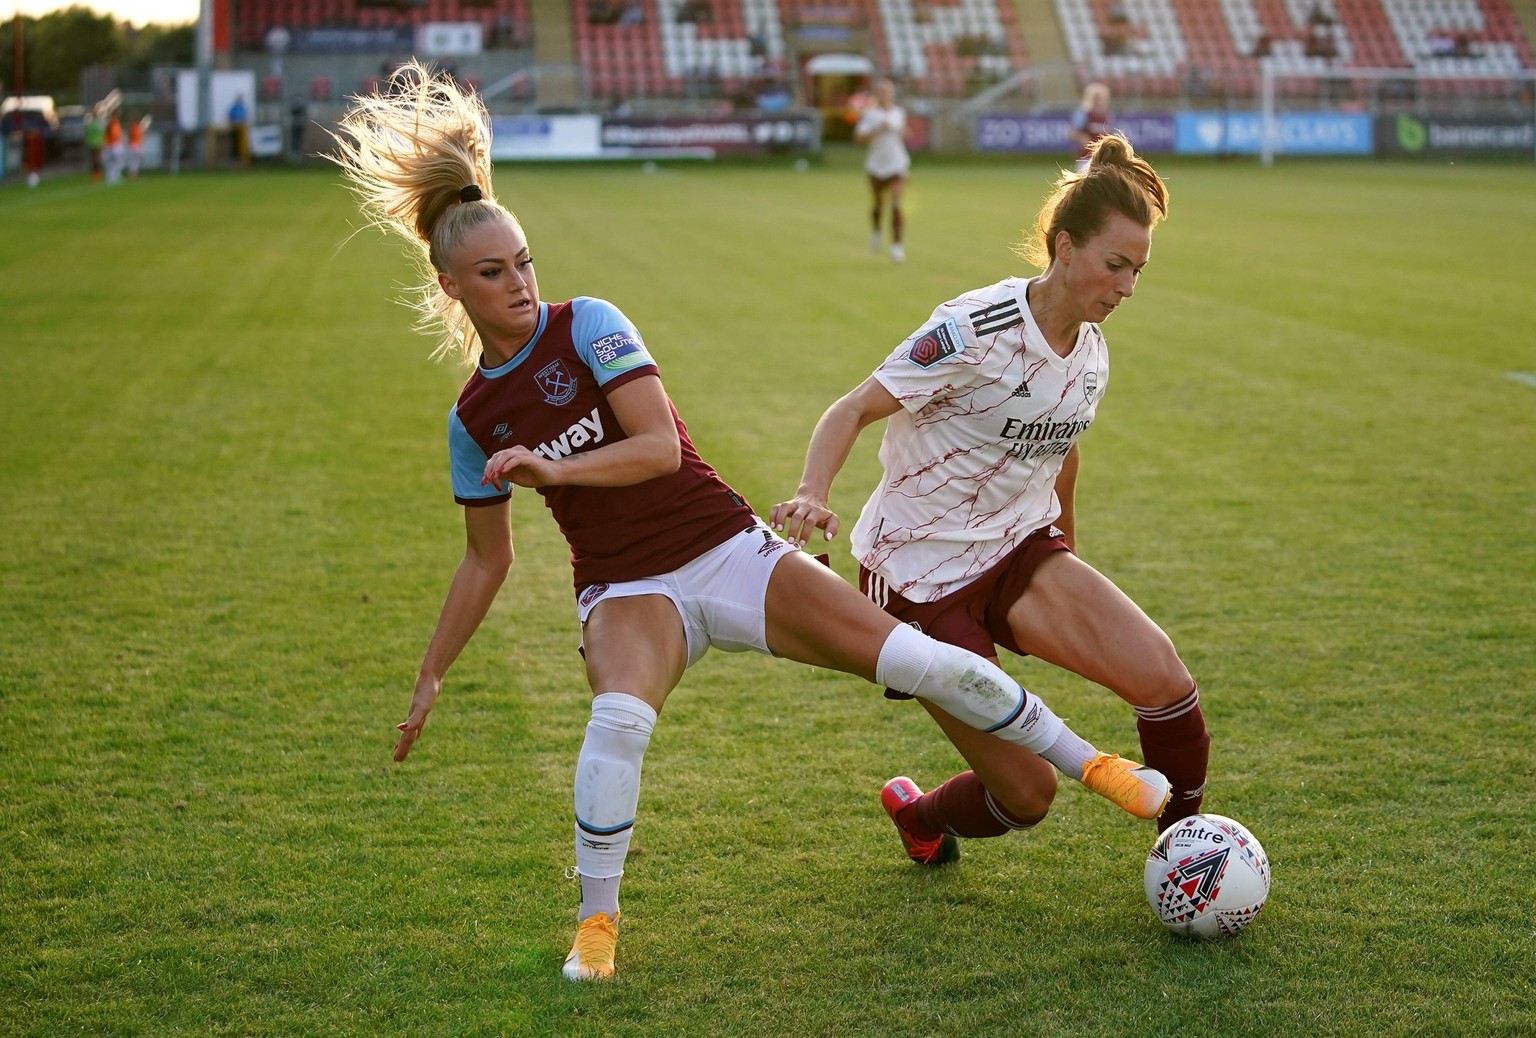 West Ham United v Arsenal - Barclays FA Women s Super League - Chigwell Construction Stadium West Ham United s Alisha Lehmann left and Arsenal s Viktoria Schnaderbeck battle for the ball during the Ba ...